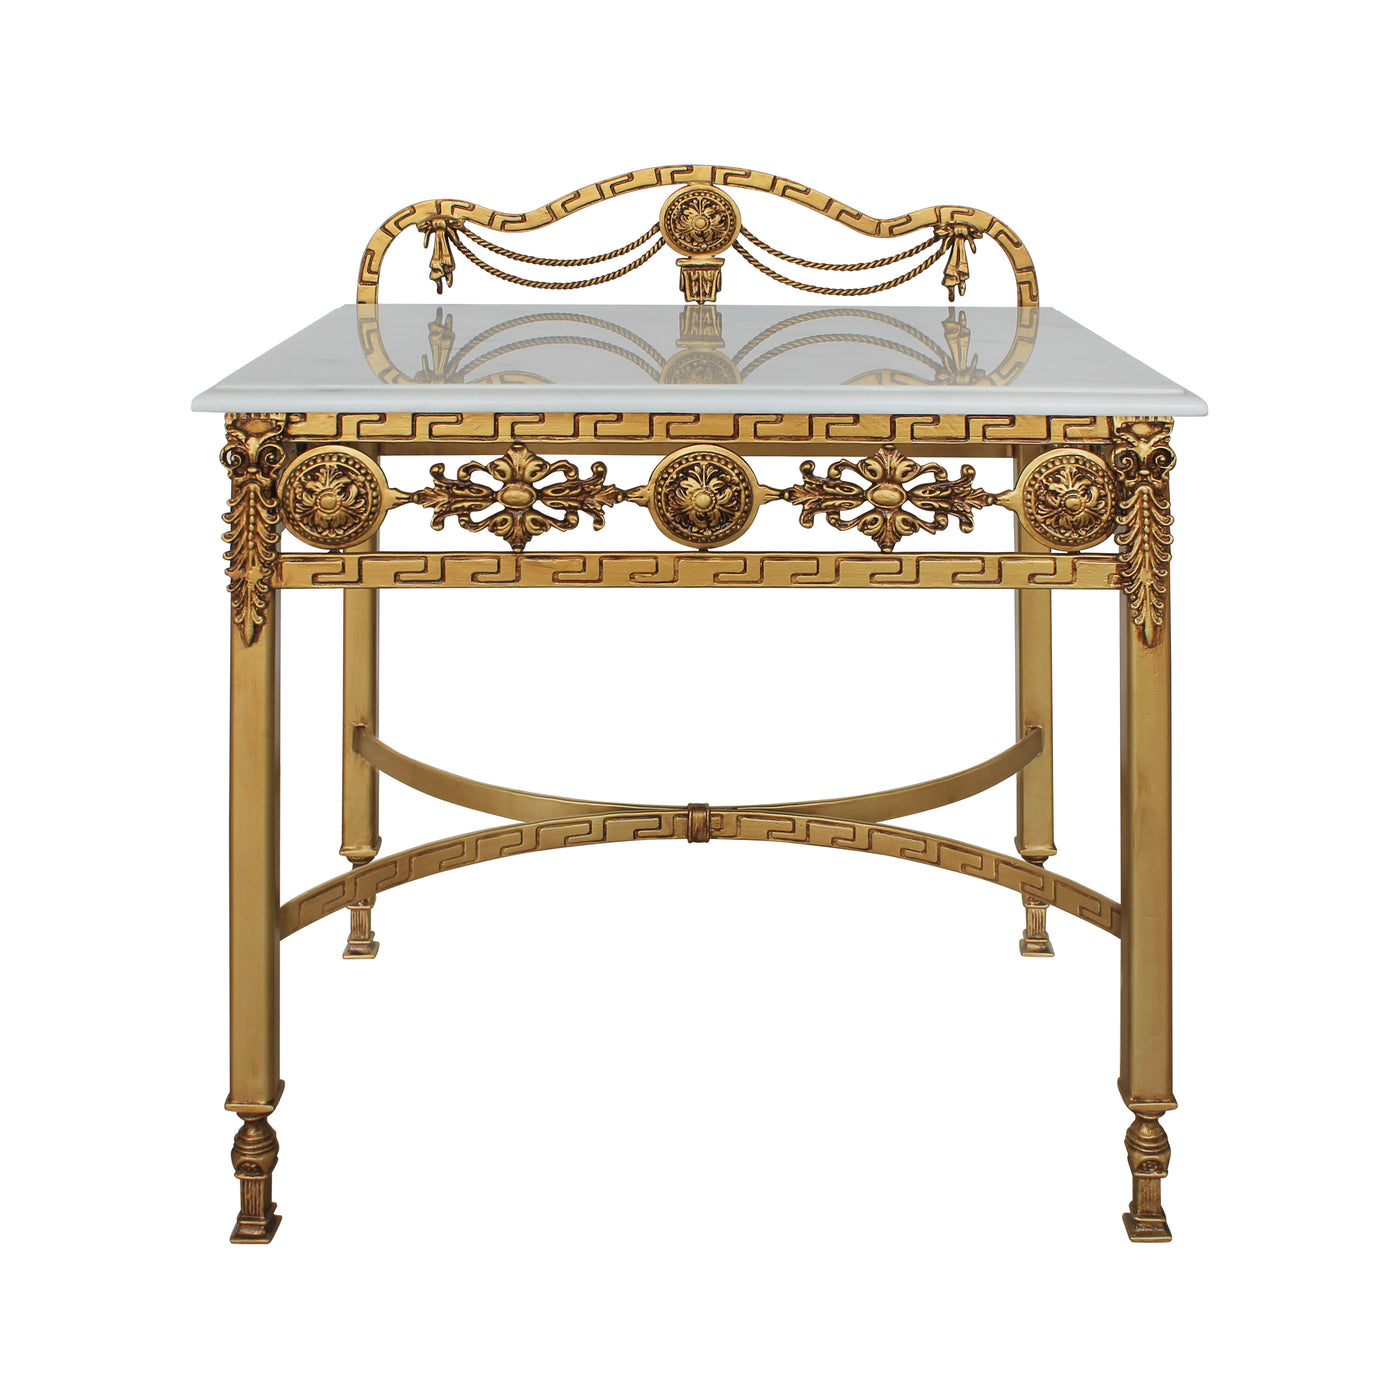 A luxurious rectangular night table in antique golden finish